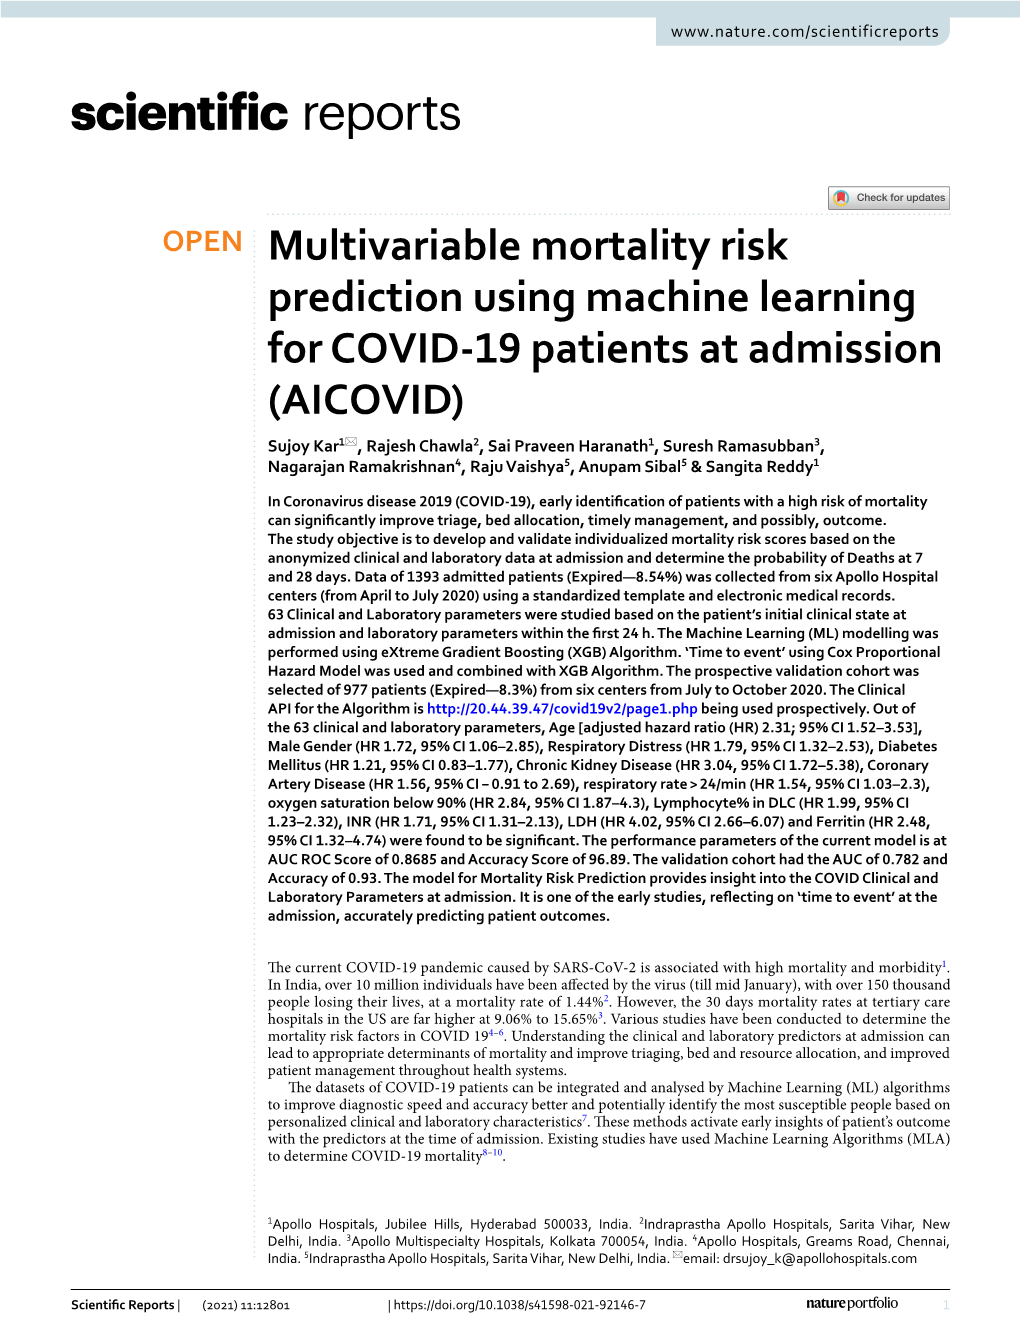 Multivariable Mortality Risk Prediction Using Machine Learning for COVID-19 Patients at Admission